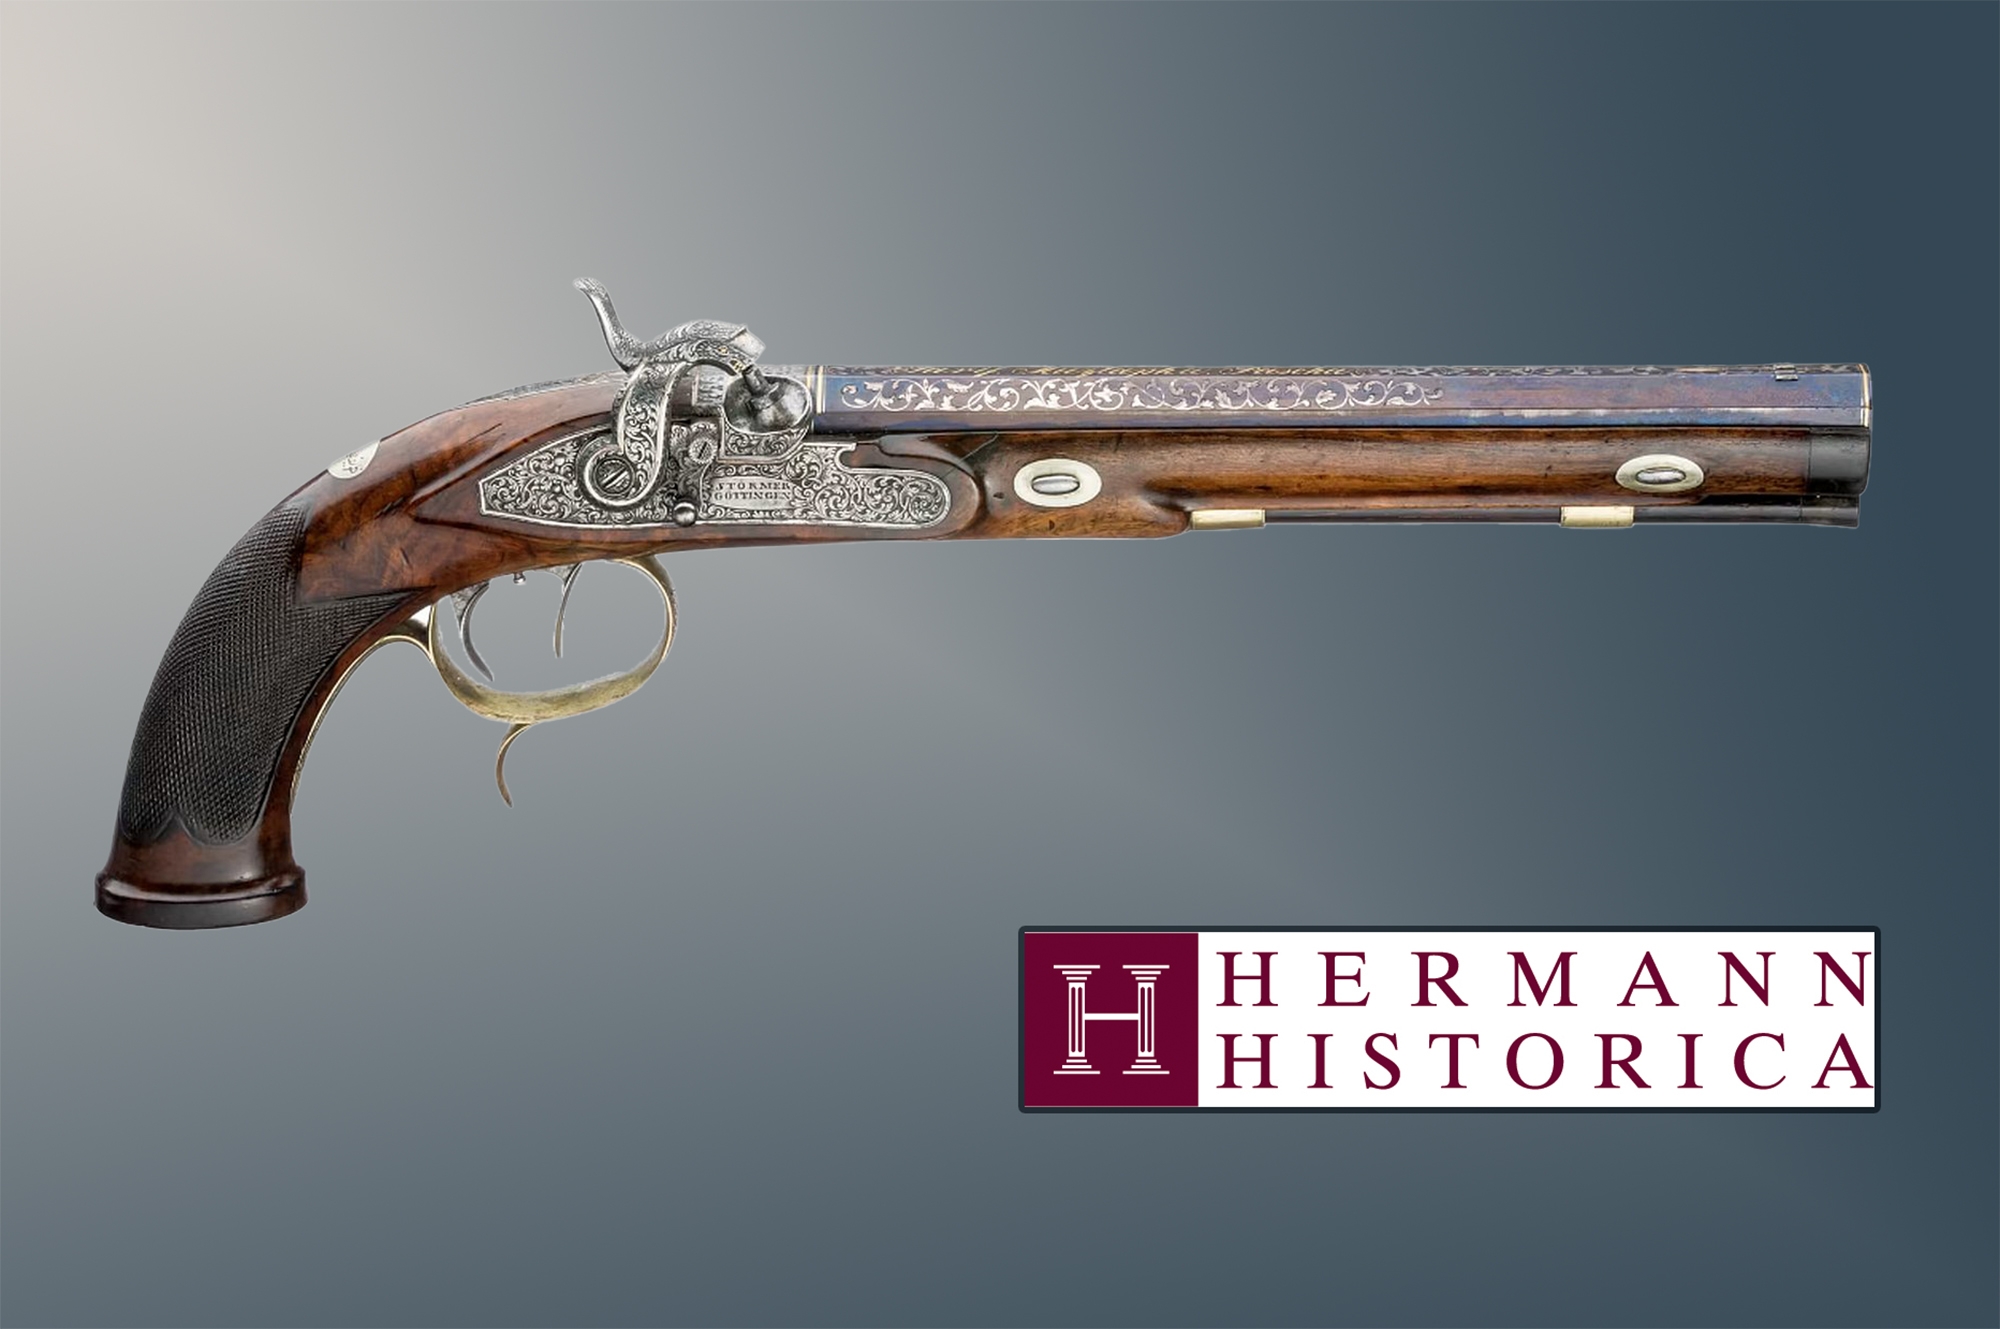 hermann-historica: Hermann Historica invites you to two presence auctions in autumn 2023: numerous valuable and rare firearms as well as armor parts will come "under the hammer“